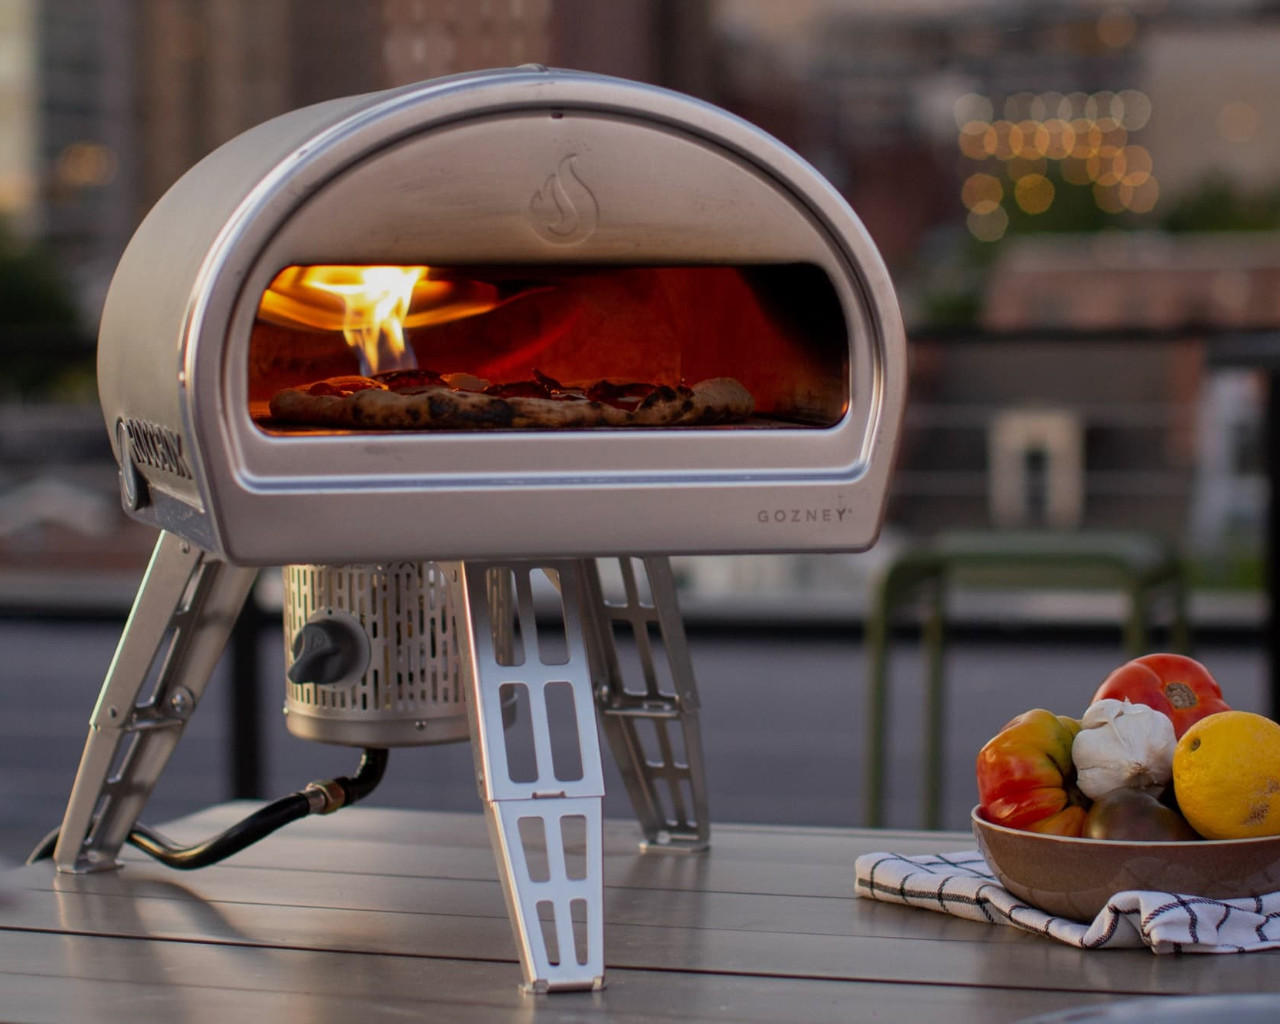 Gozney Roccbox Portable Pizza Oven - Grey, Grey, hi-res image number null